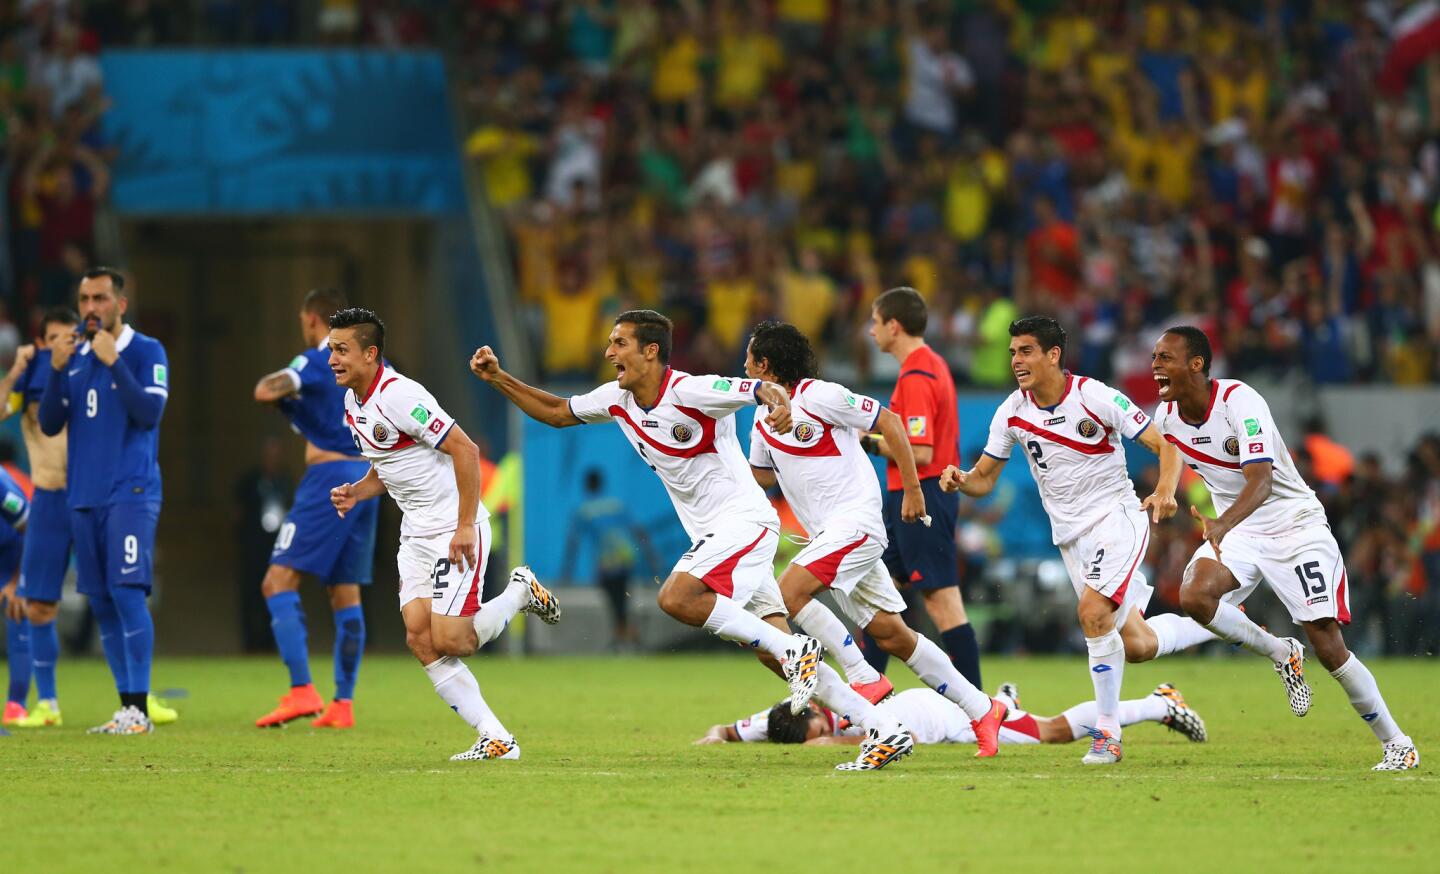 Costa Rica players celebrate after defeating Greece in a penalty shootout.